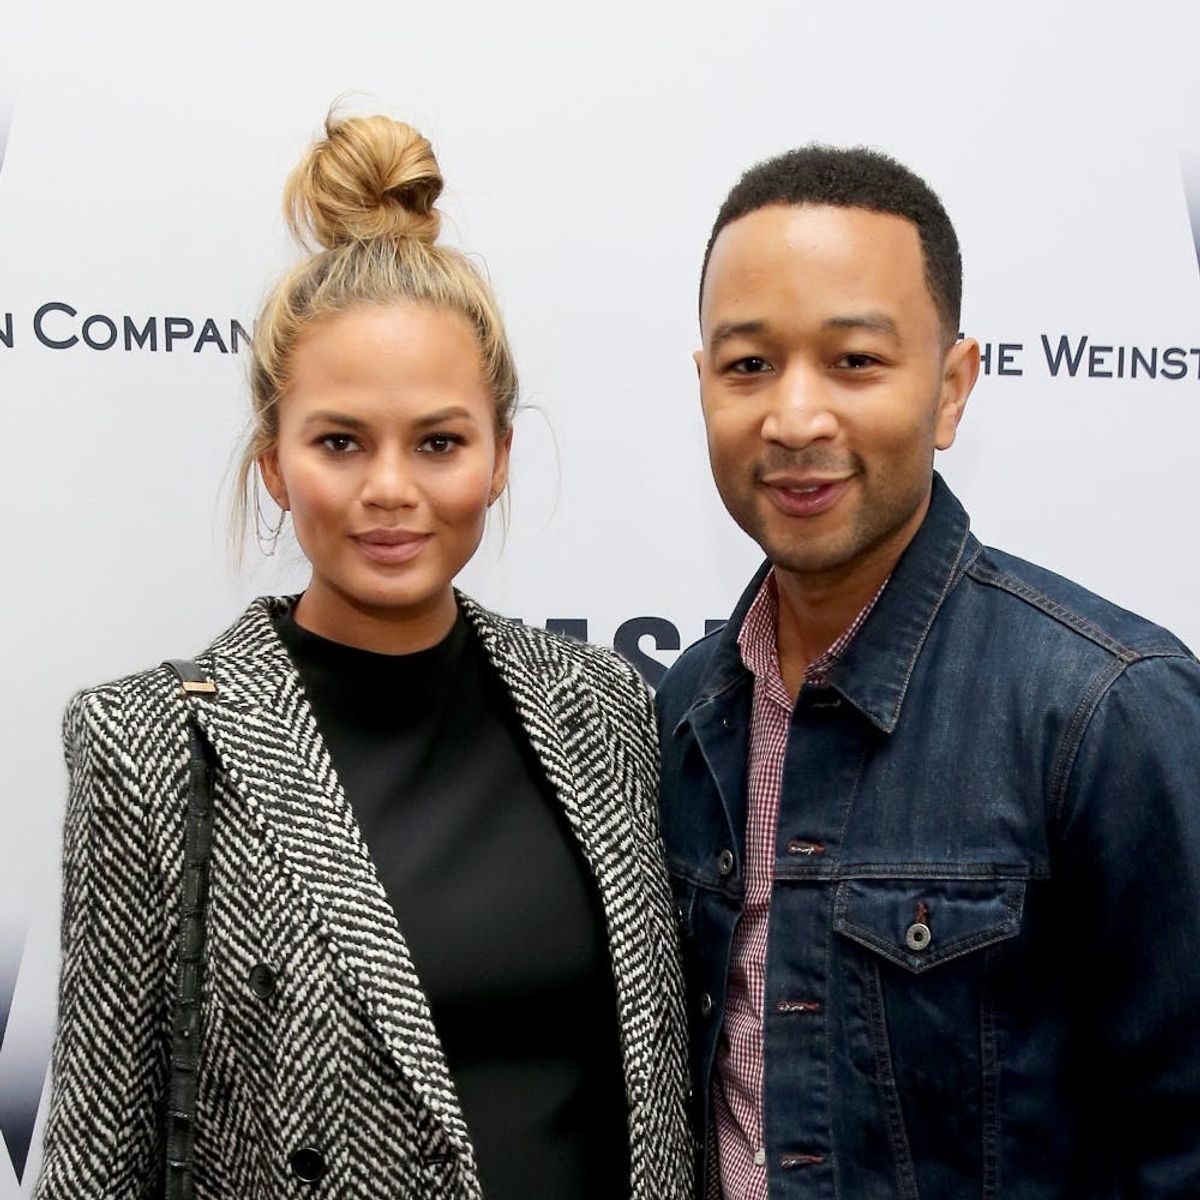 Chrissy Teigen’s “Burpface” Baby Pic Is the Cutest Thing You’ll See Today